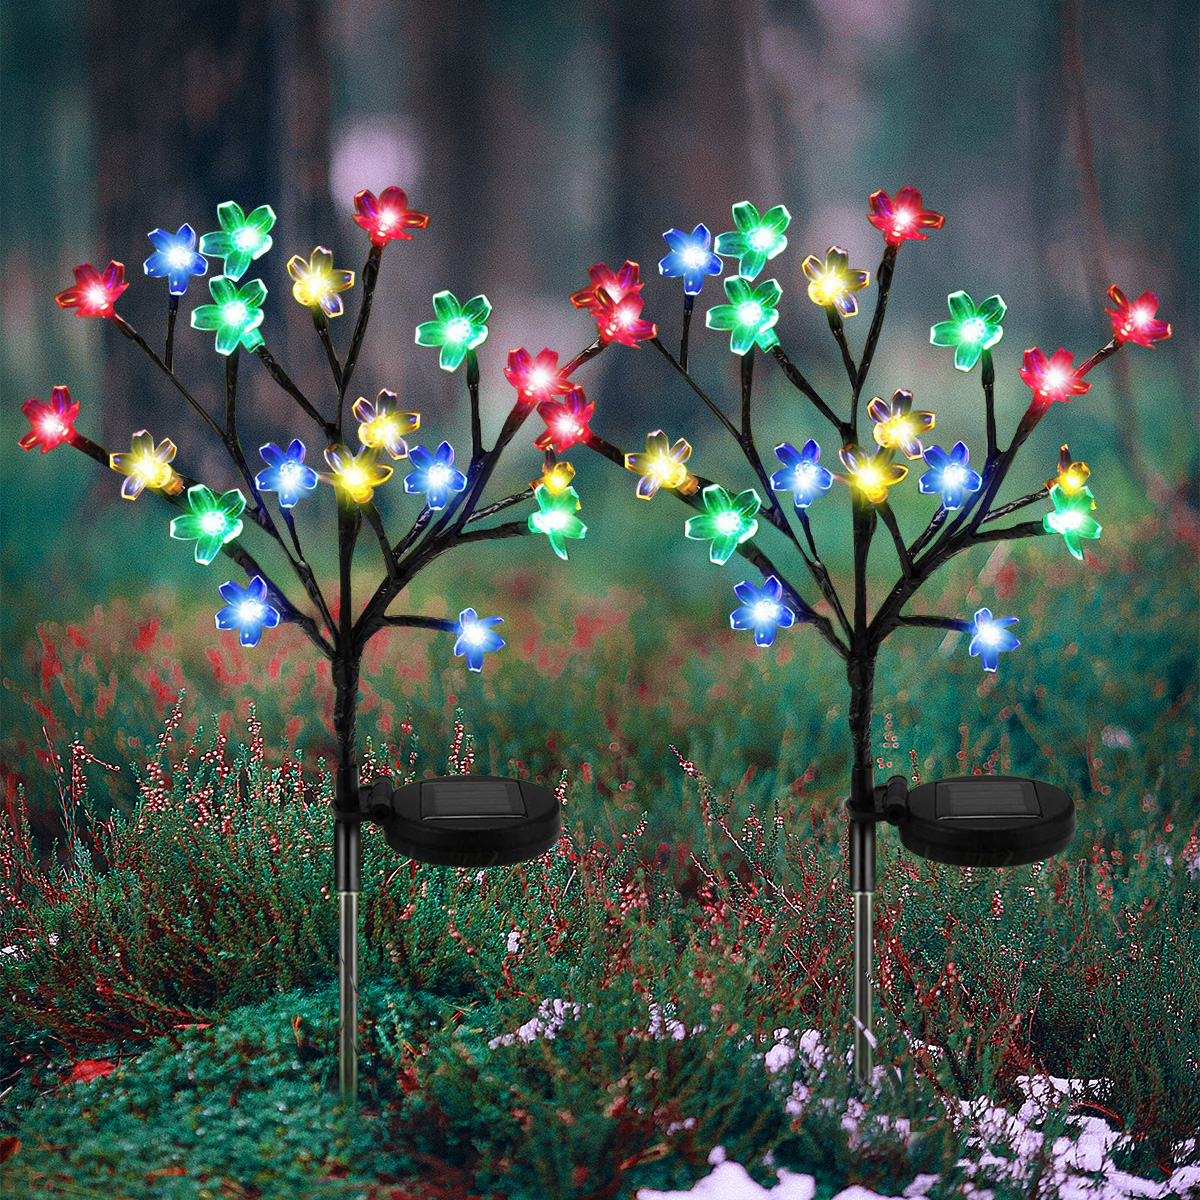 2 Pack Solar Fairy Lights Waterproof Multi-Color Solar Powered Garden Lights, Solar Flower Lights with 20 Cherry Blossom, Bigger Solar Panel for Pathway Patio Yard Christmas Decor - image 1 of 8